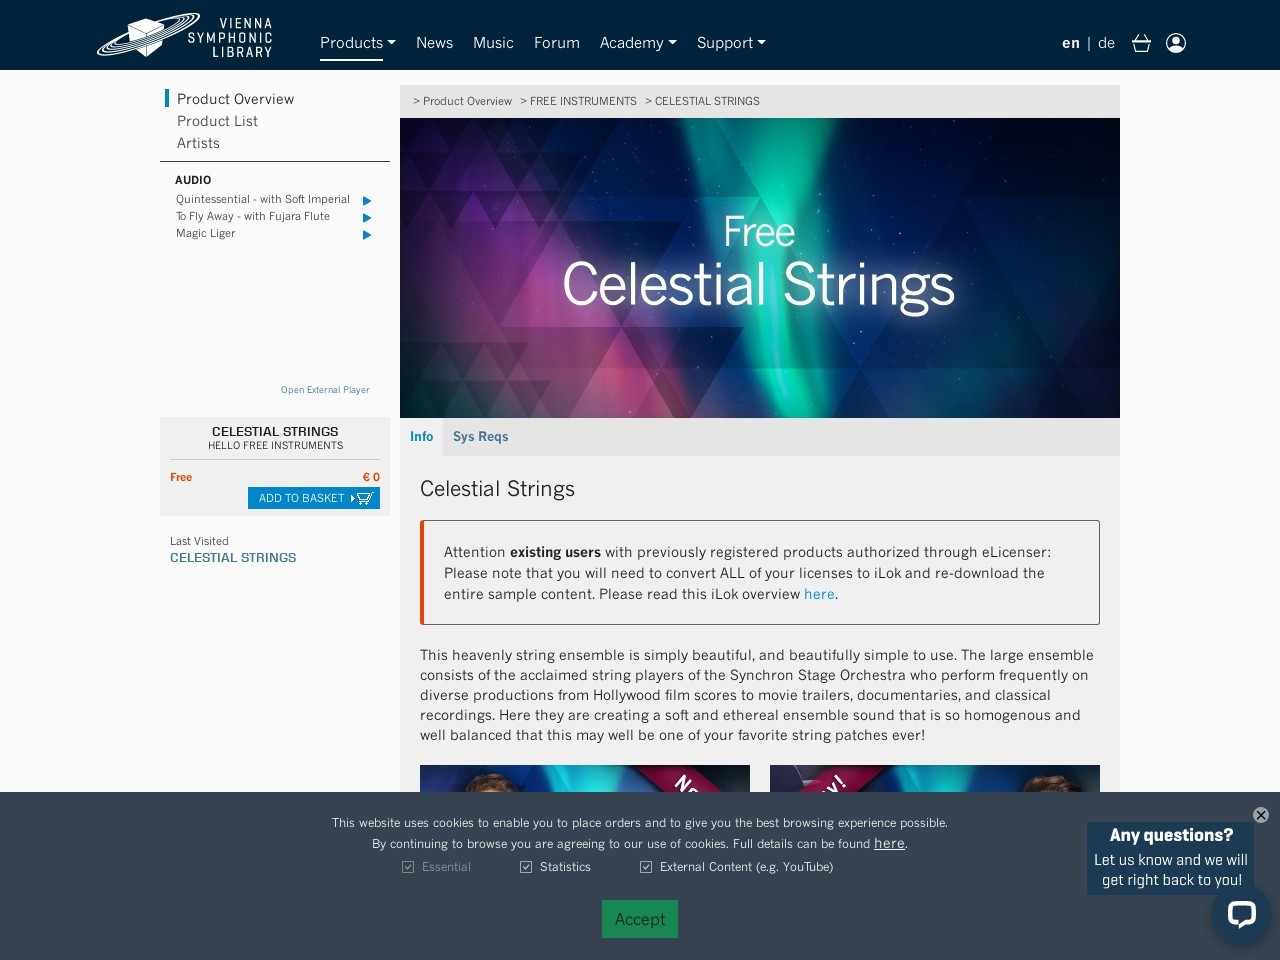 CELESTIAL STRINGS - Vienna Symphonic Library